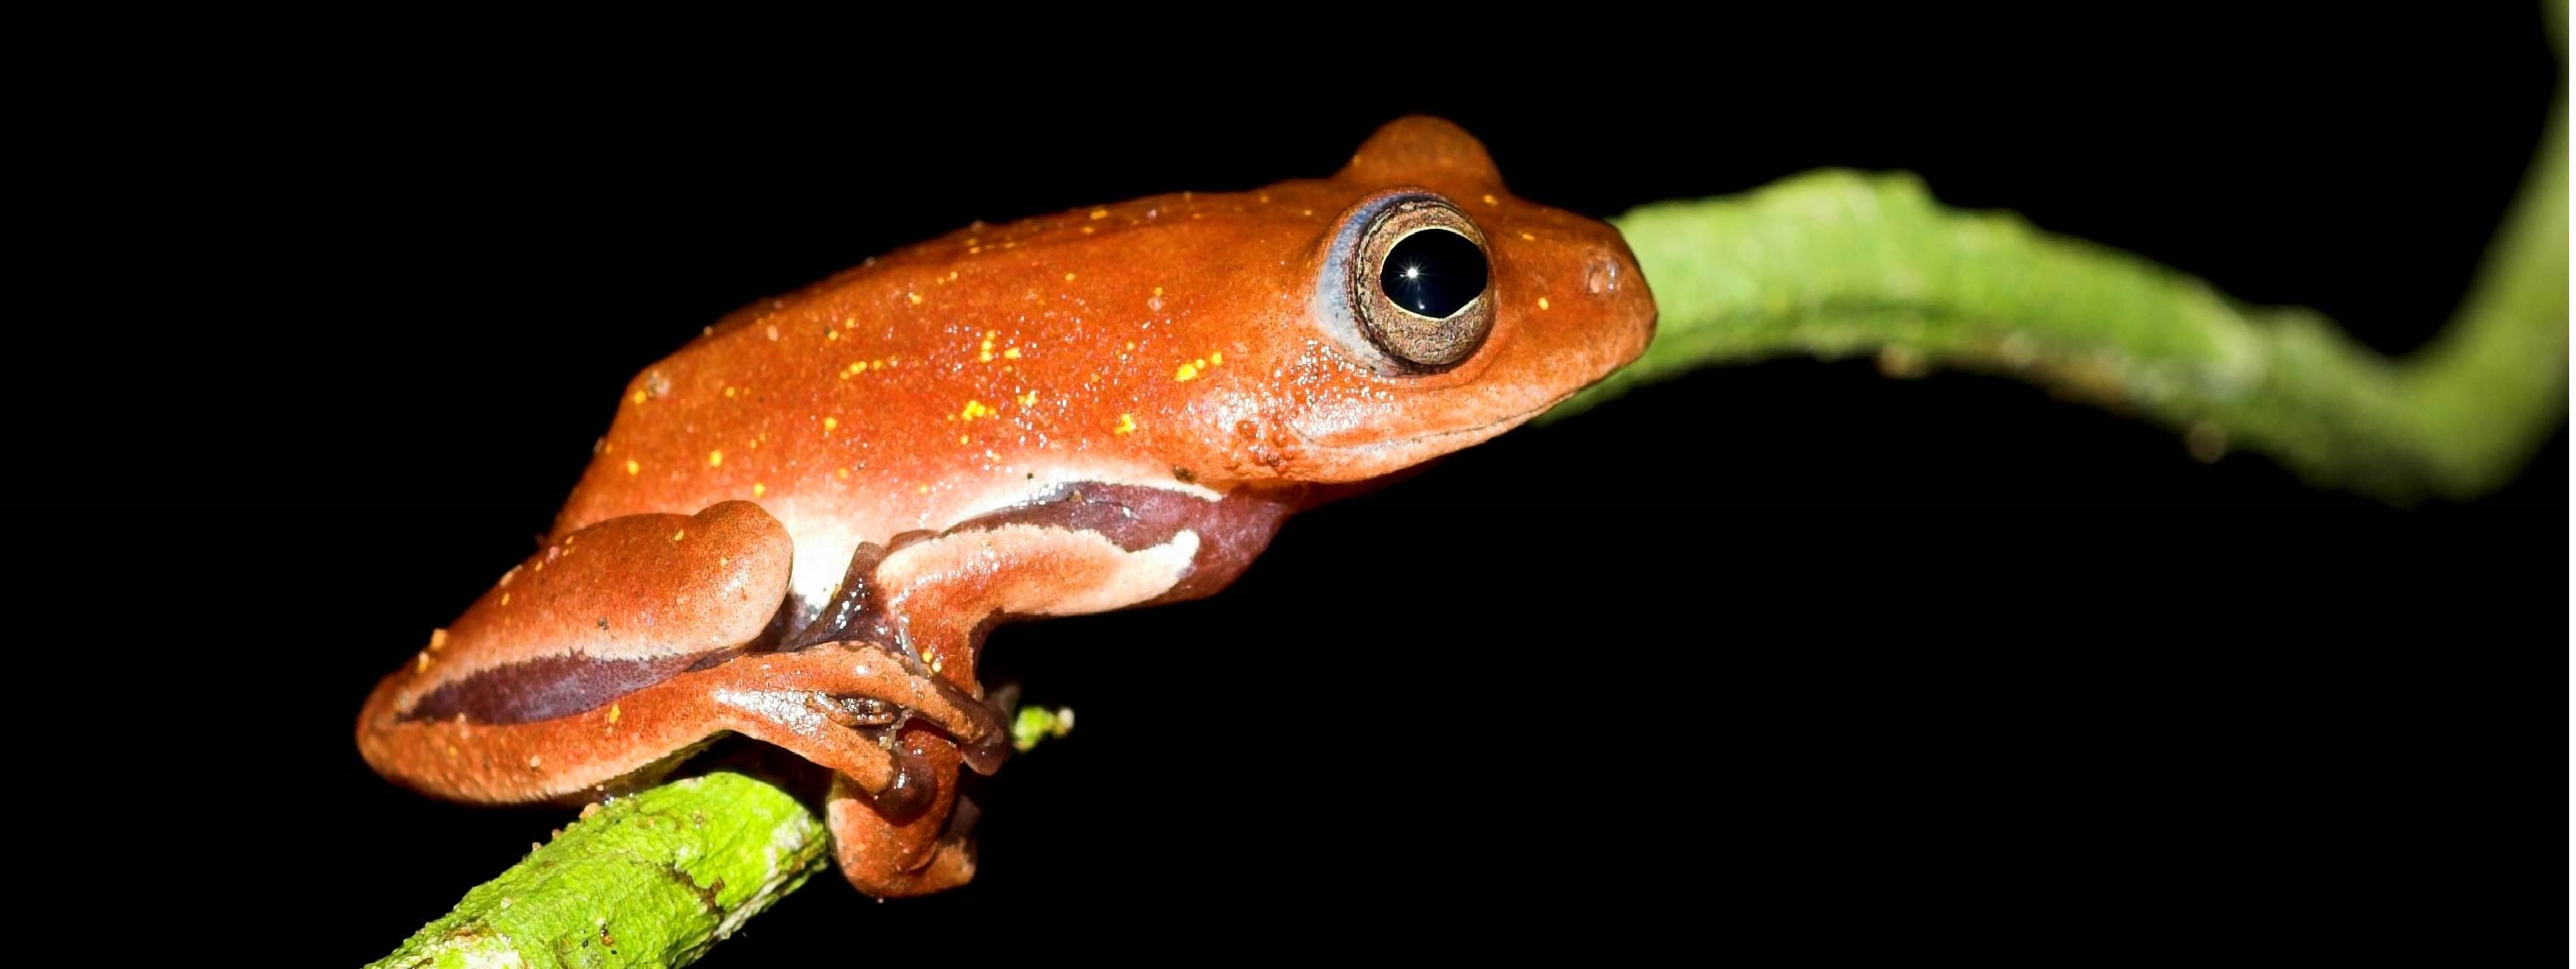 Volunteer with the ASG and help support global amphibian conservation!